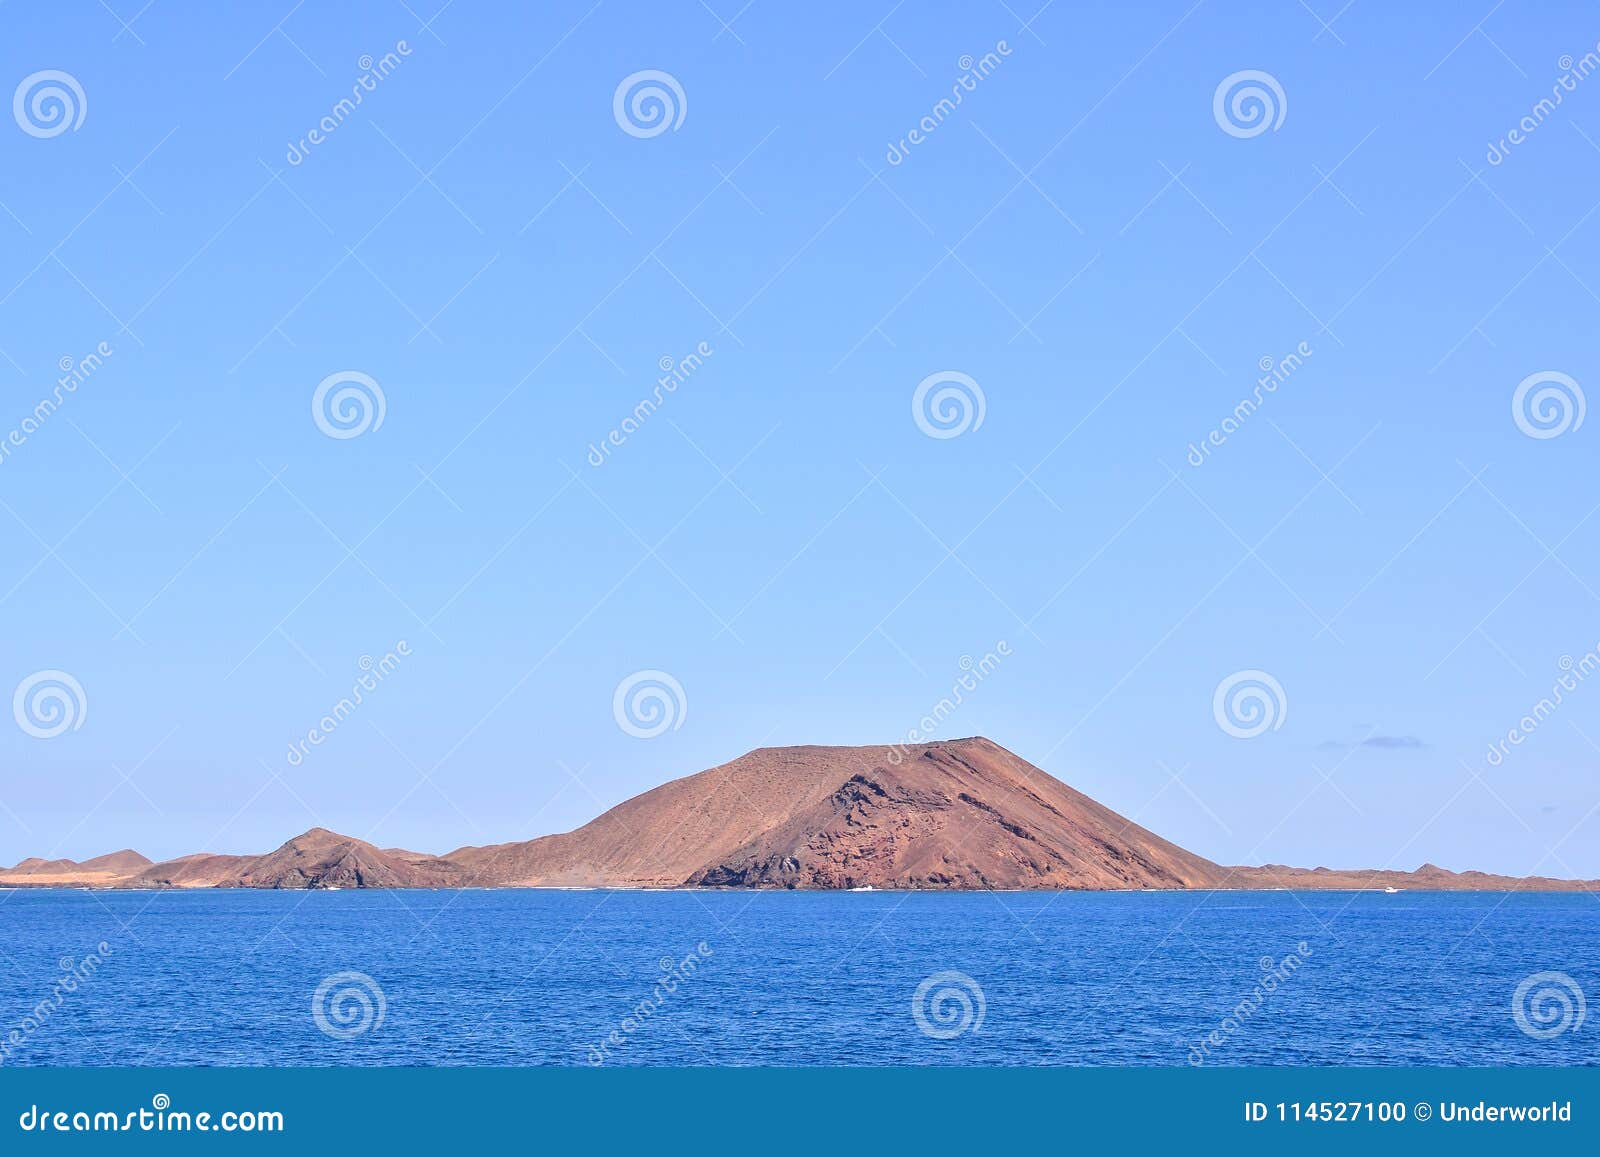 landscape in tropical volcanic canary islands spain